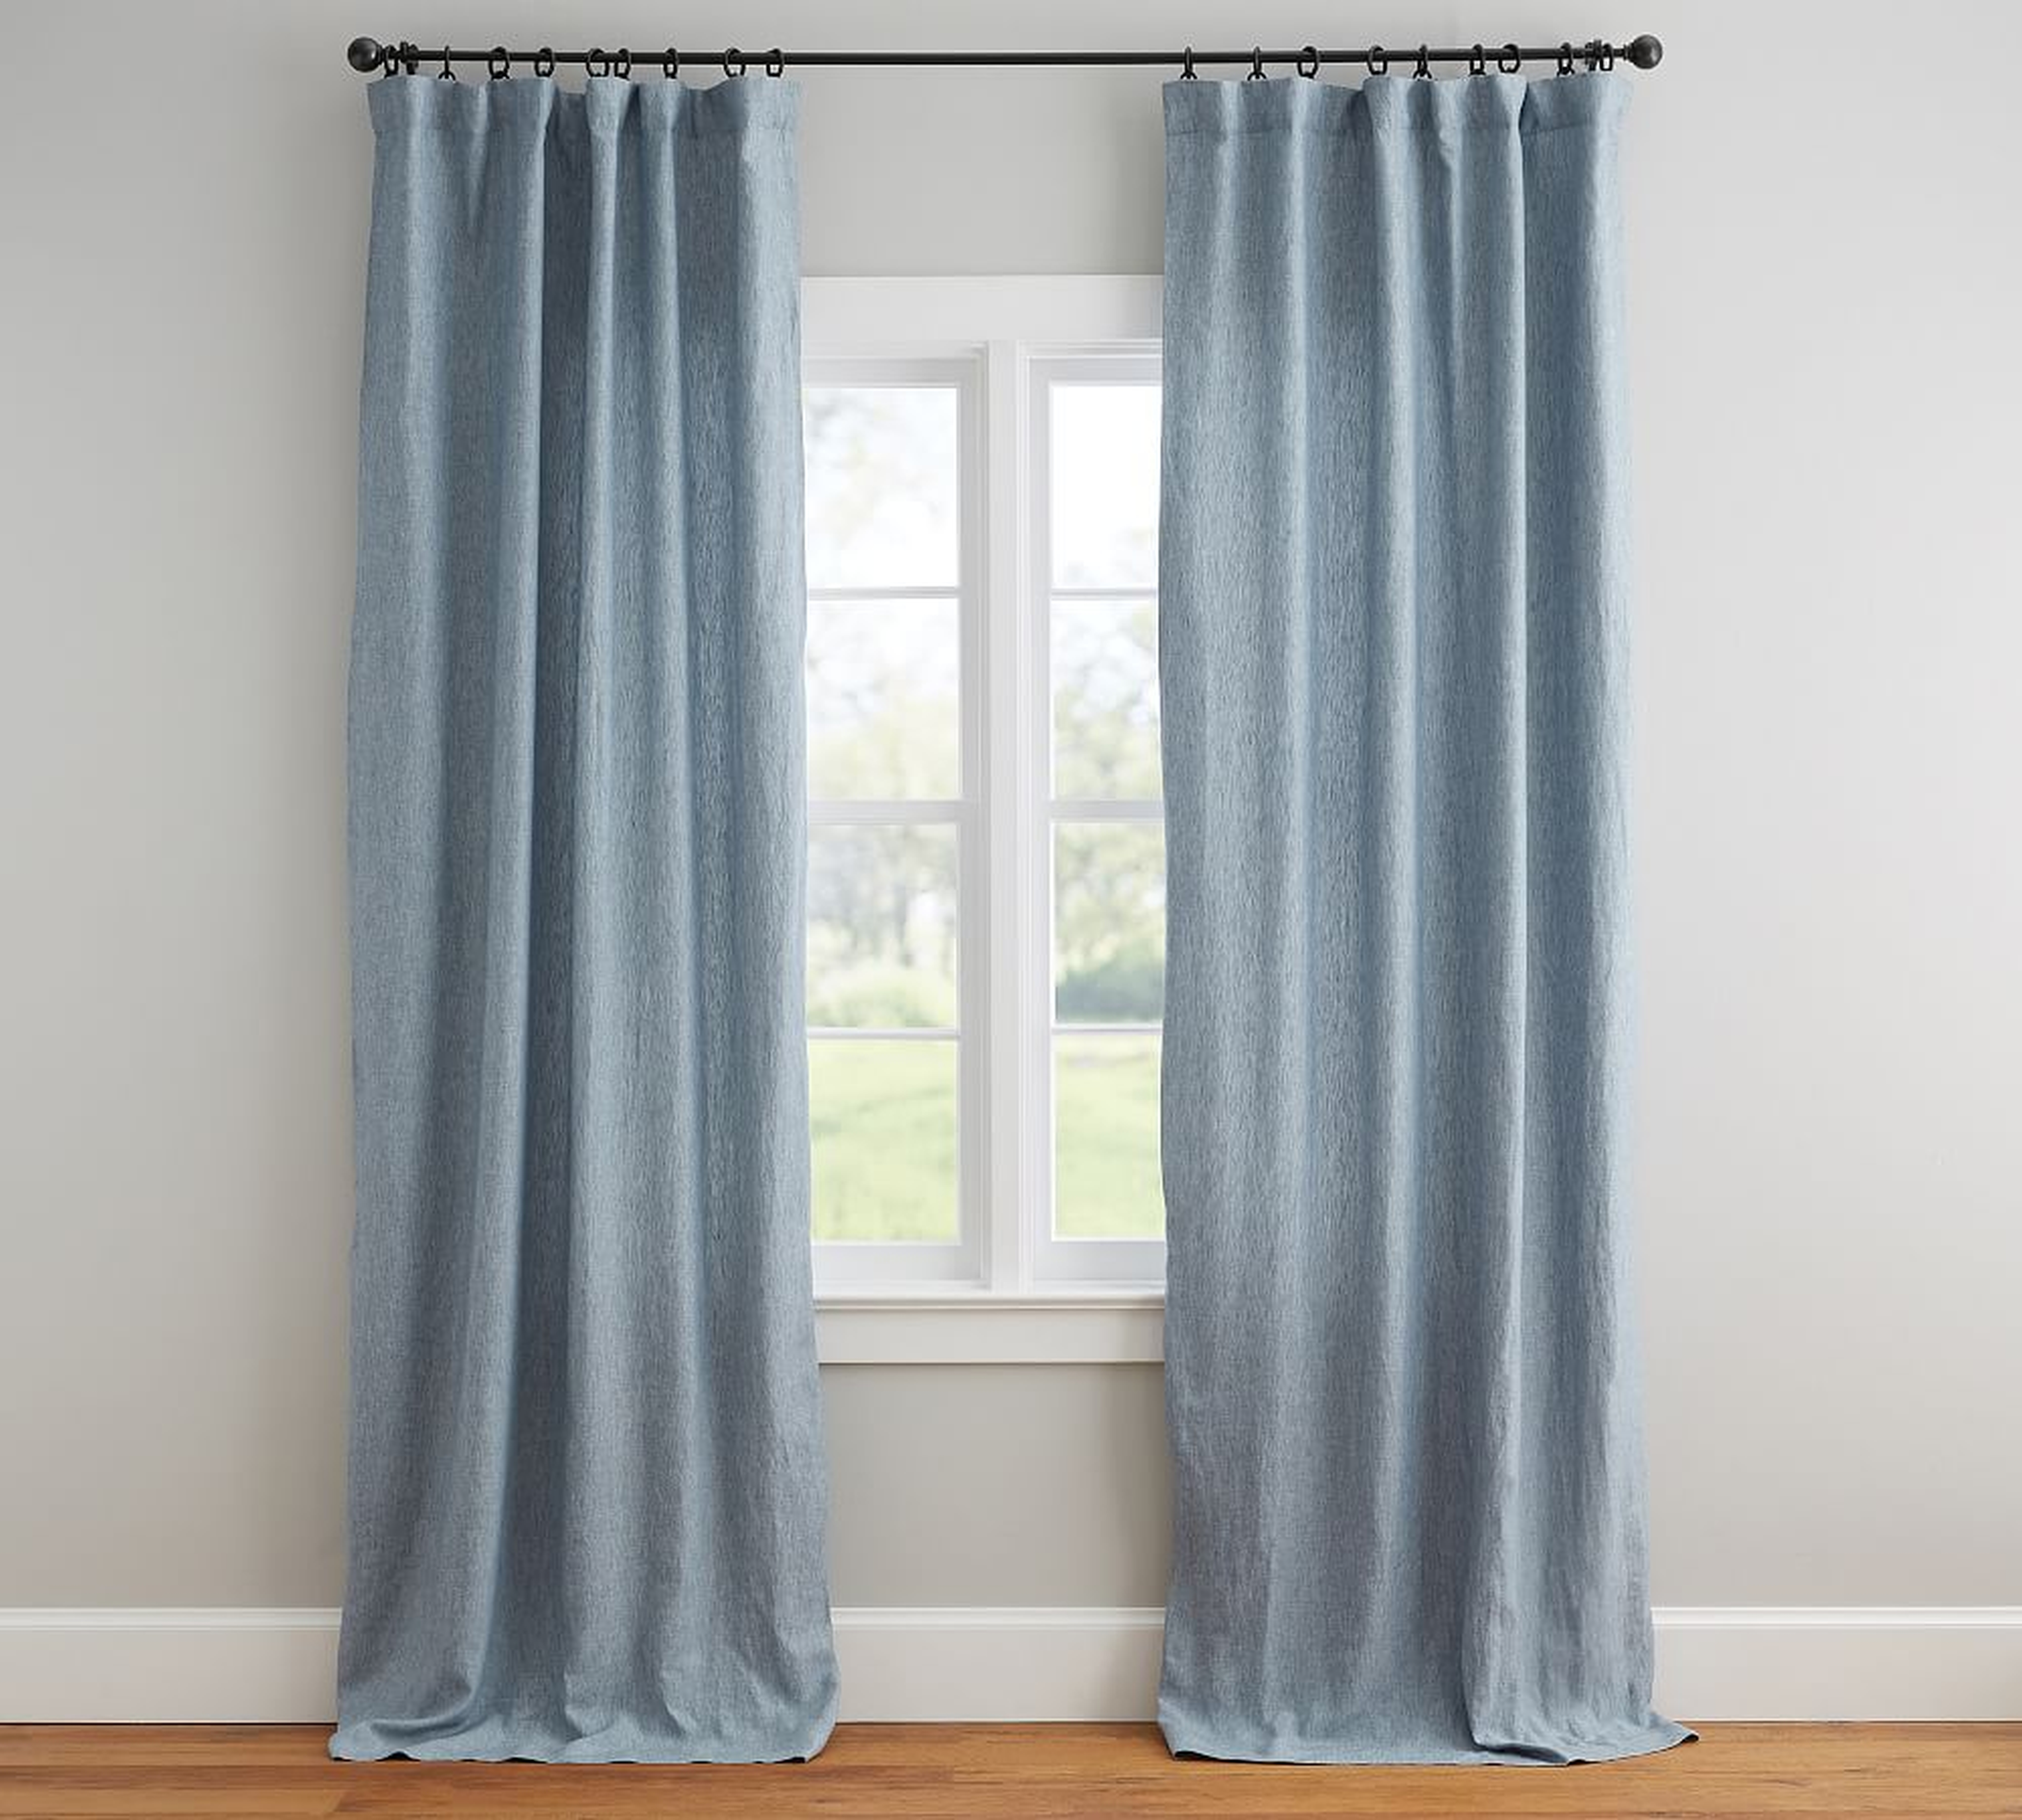 Belgian Flax Linen Curtain, Cotton Lining, 50 x 96", Blue Chambray - Pottery Barn